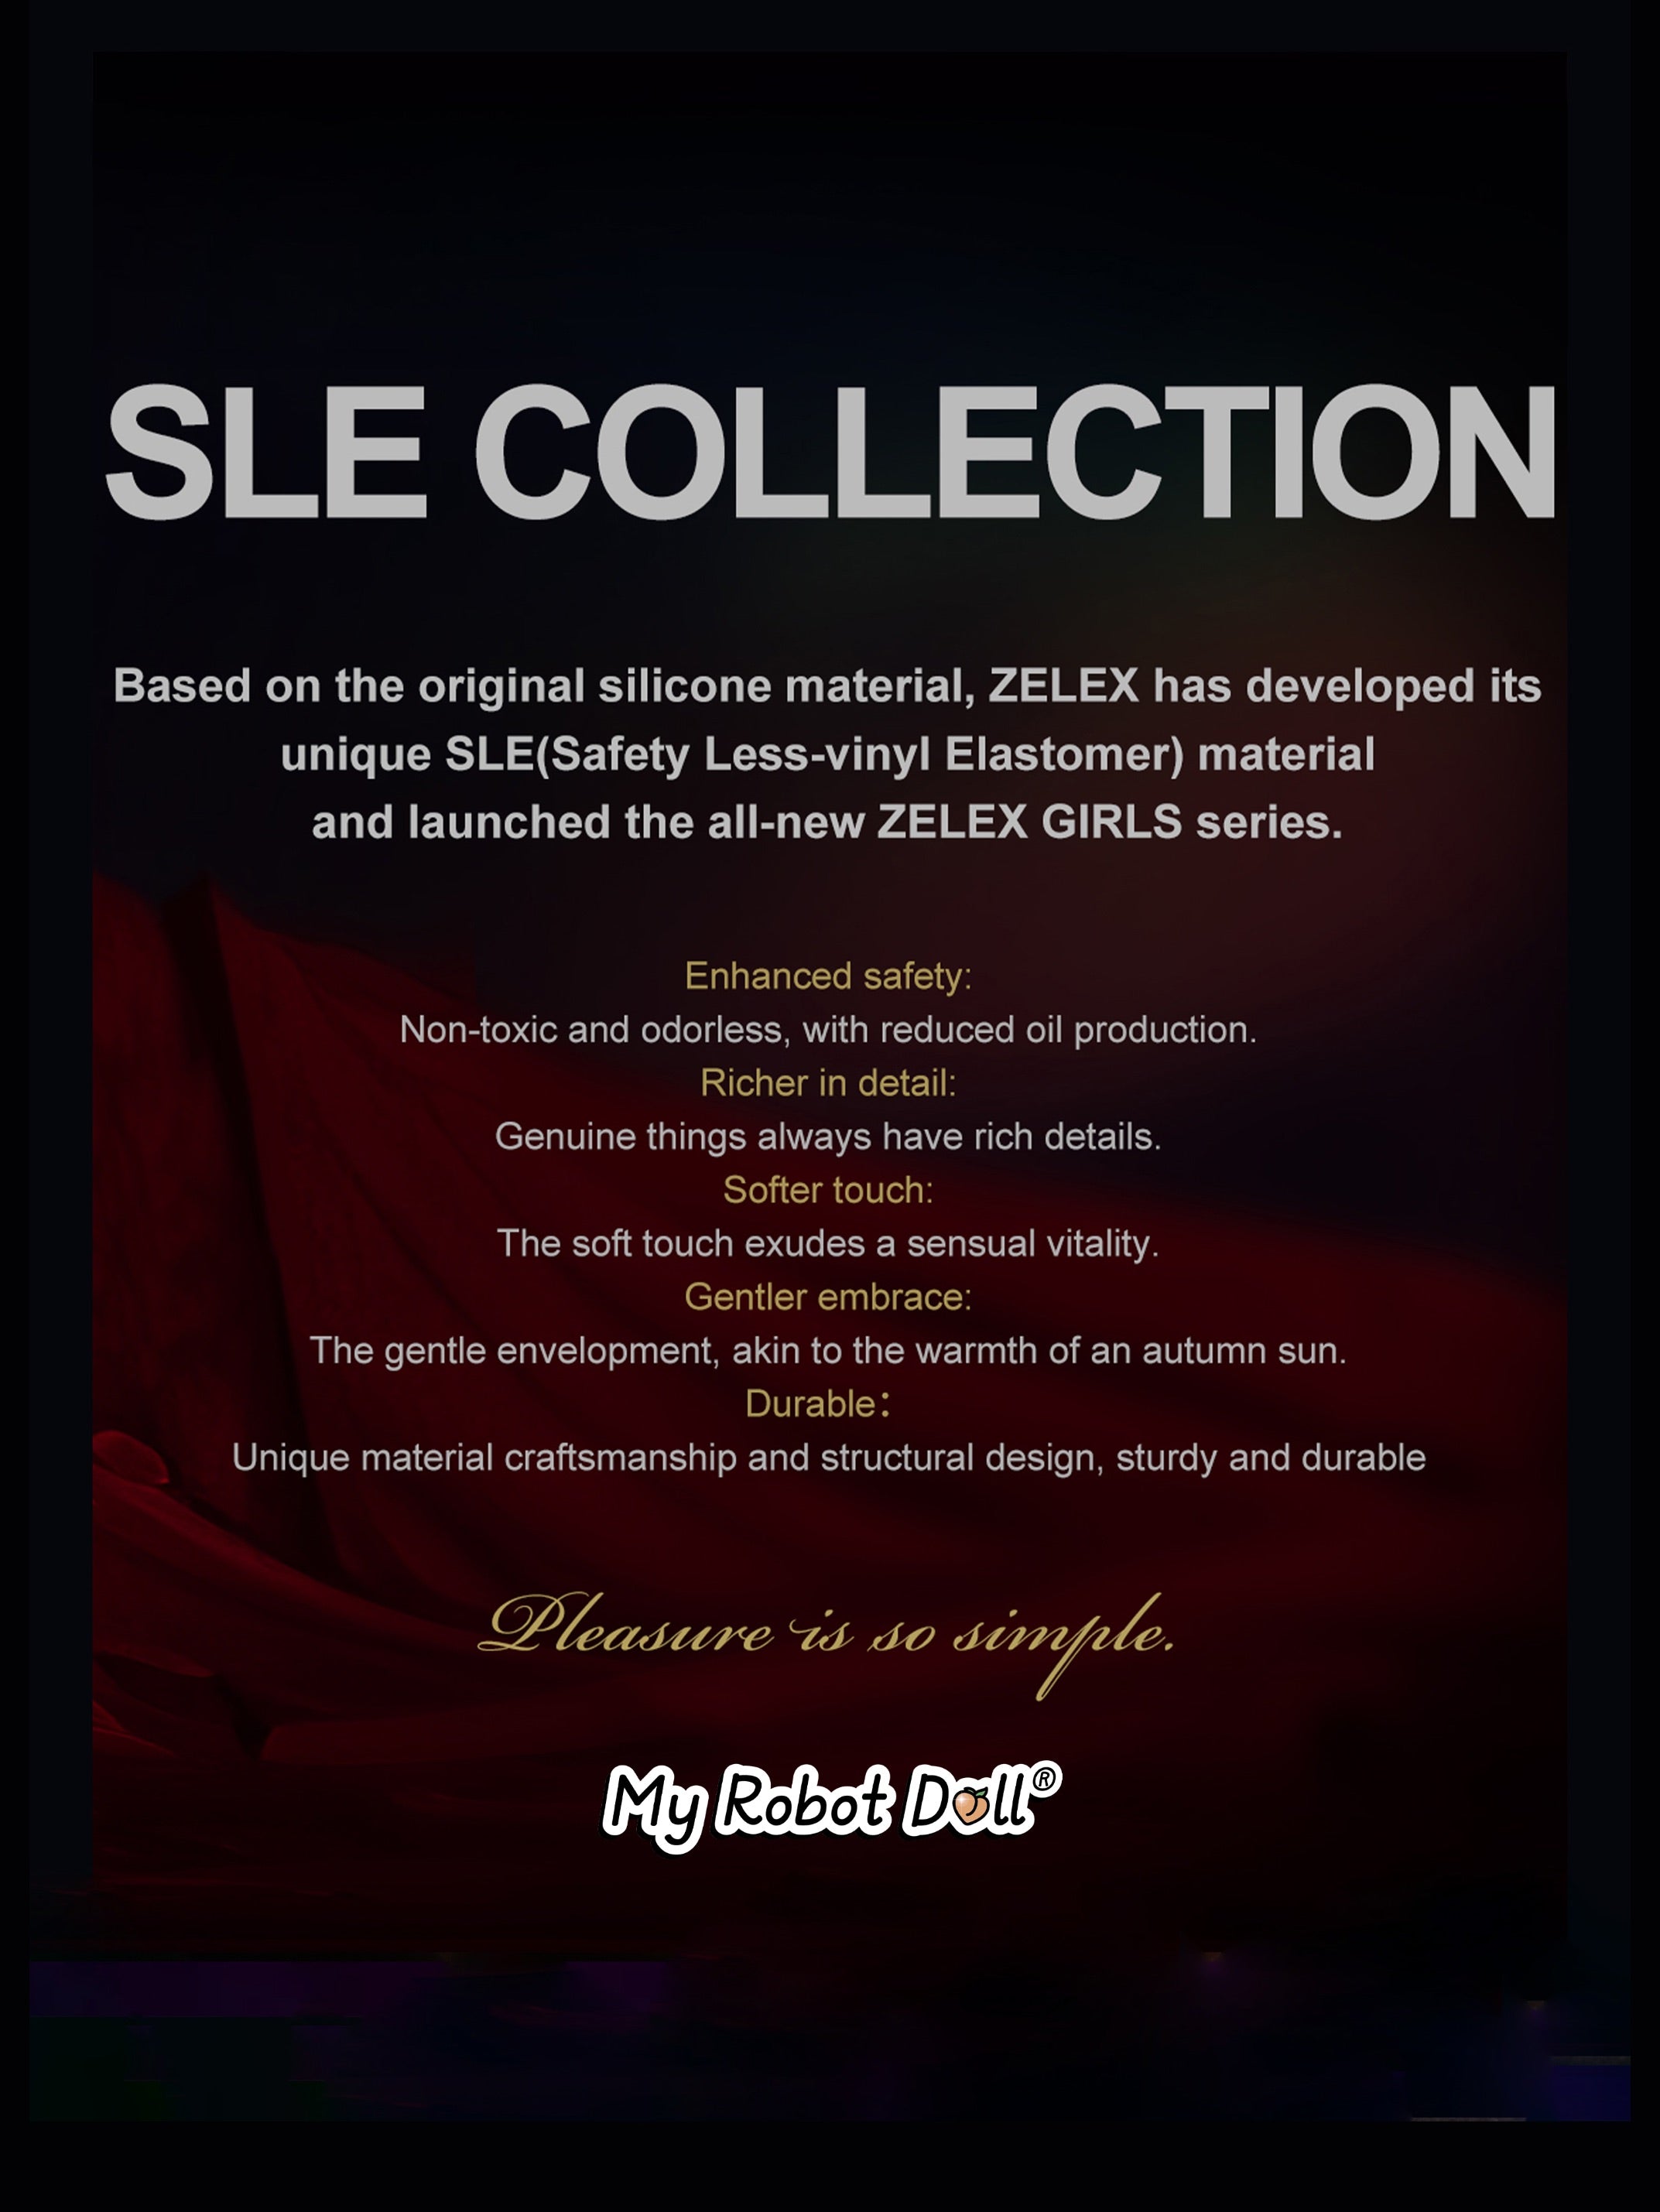 Zelex SLE Collection